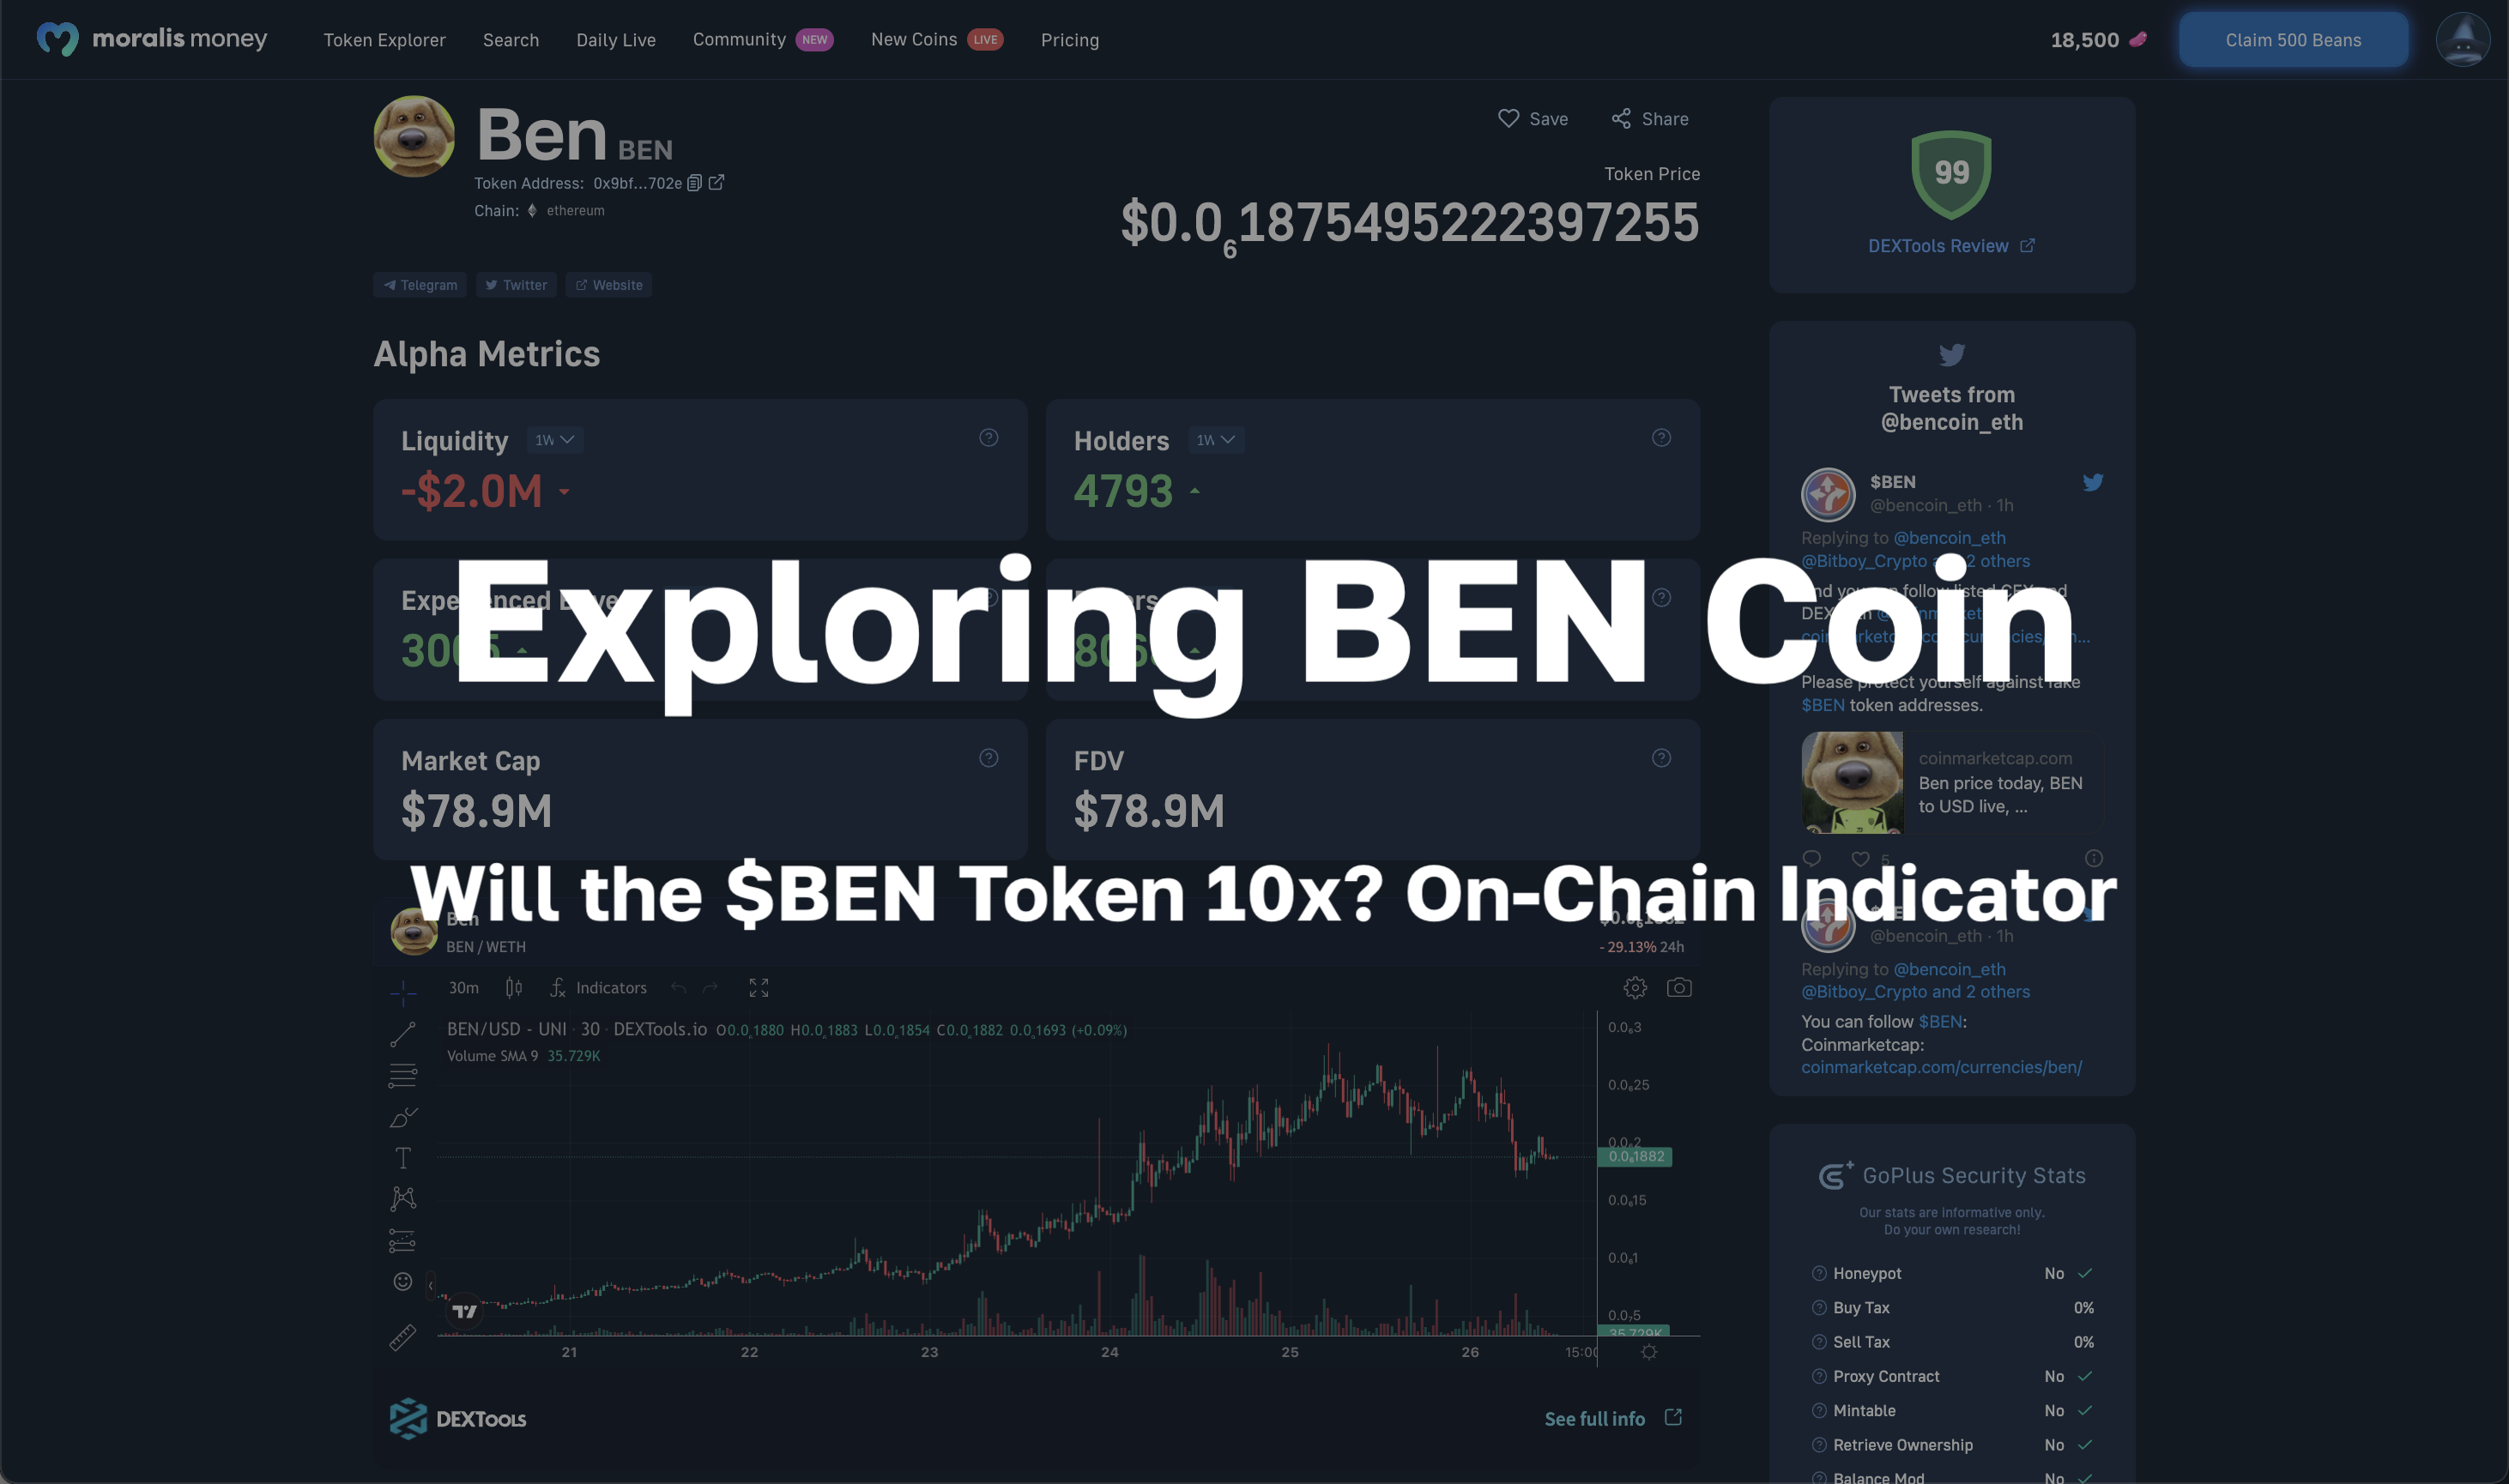 Exploring BEN Coin - Will the $BEN Token 10x? On-Chain Trading Indicator